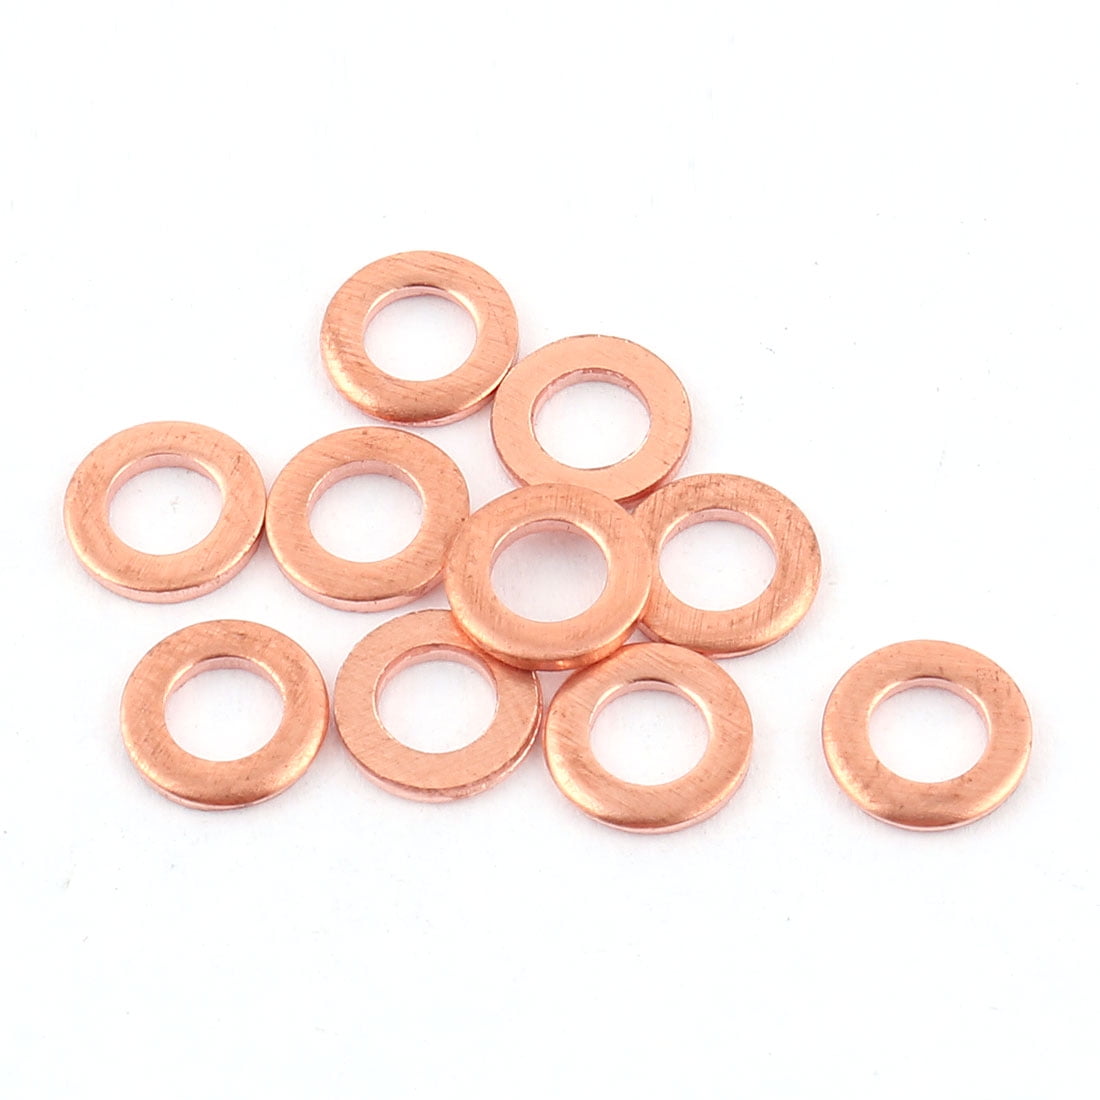 Details about   Thick 1-1.5-2mm M5-M48 Copper Flat Washer Copper Crush Washers Gasket Seal Ring 